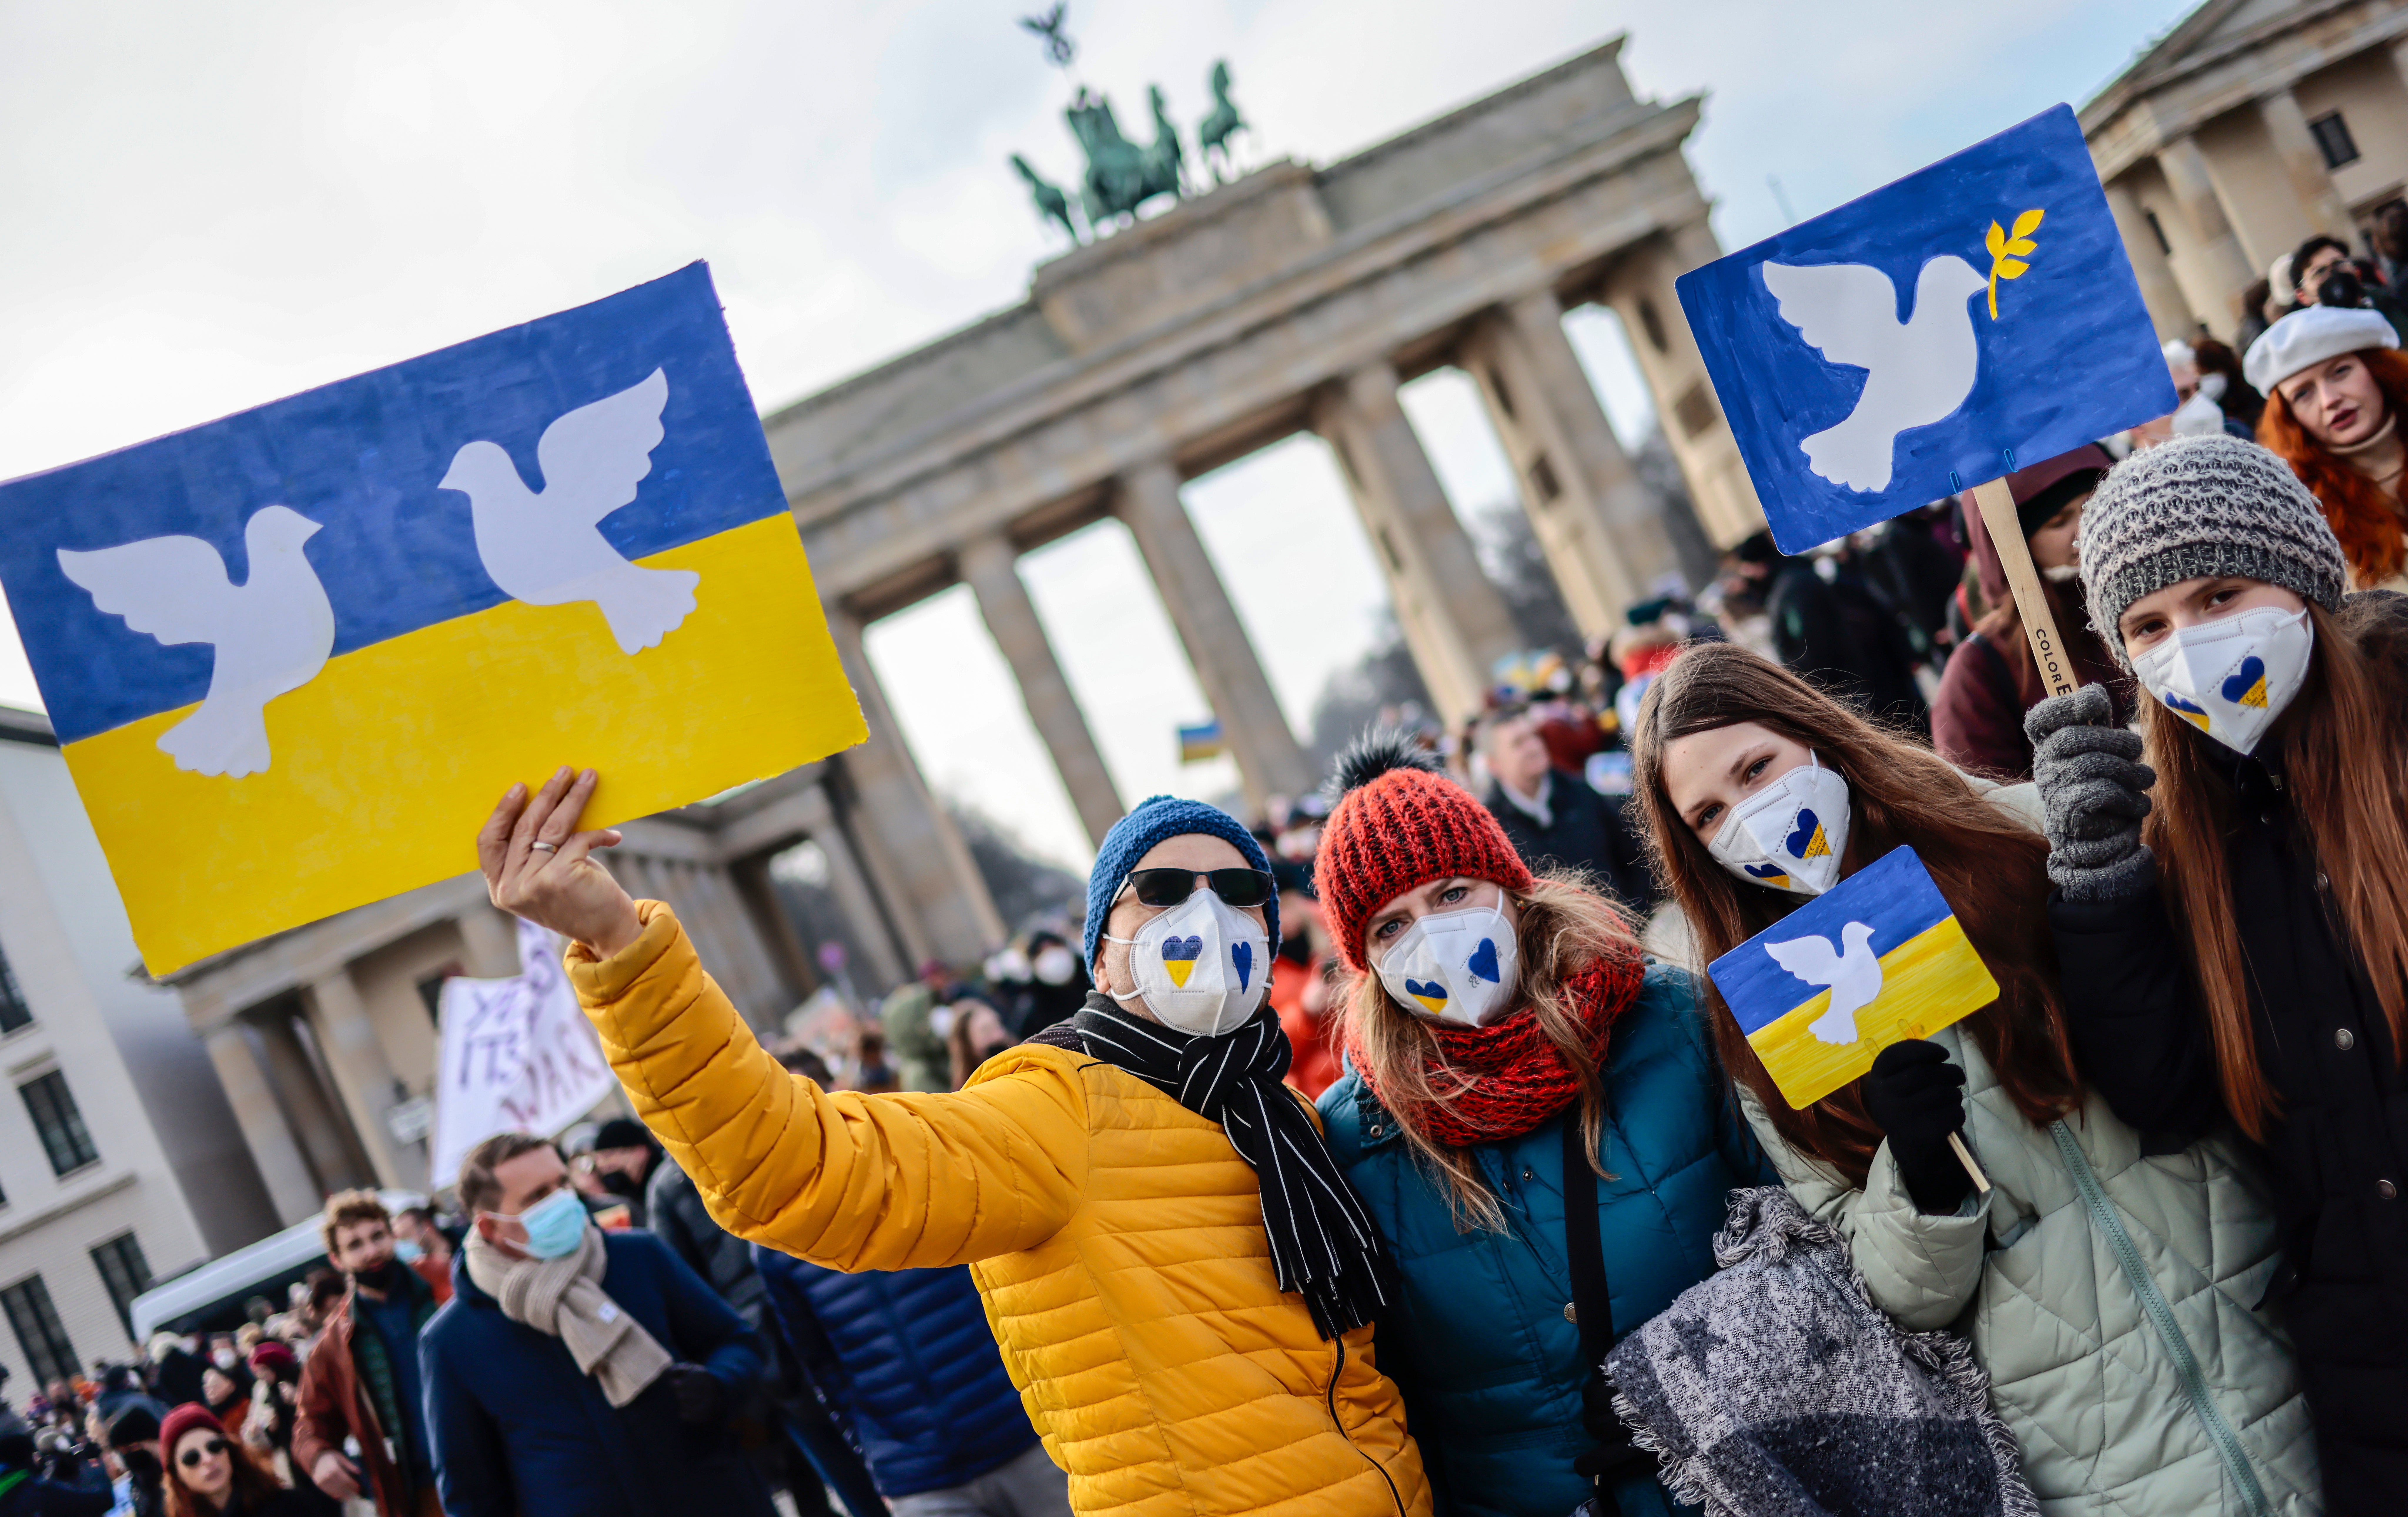 People gather at Brandenburg Gate to protest against the ongoing war in Ukraine on February 27, 2022 in Berlin, Germany.